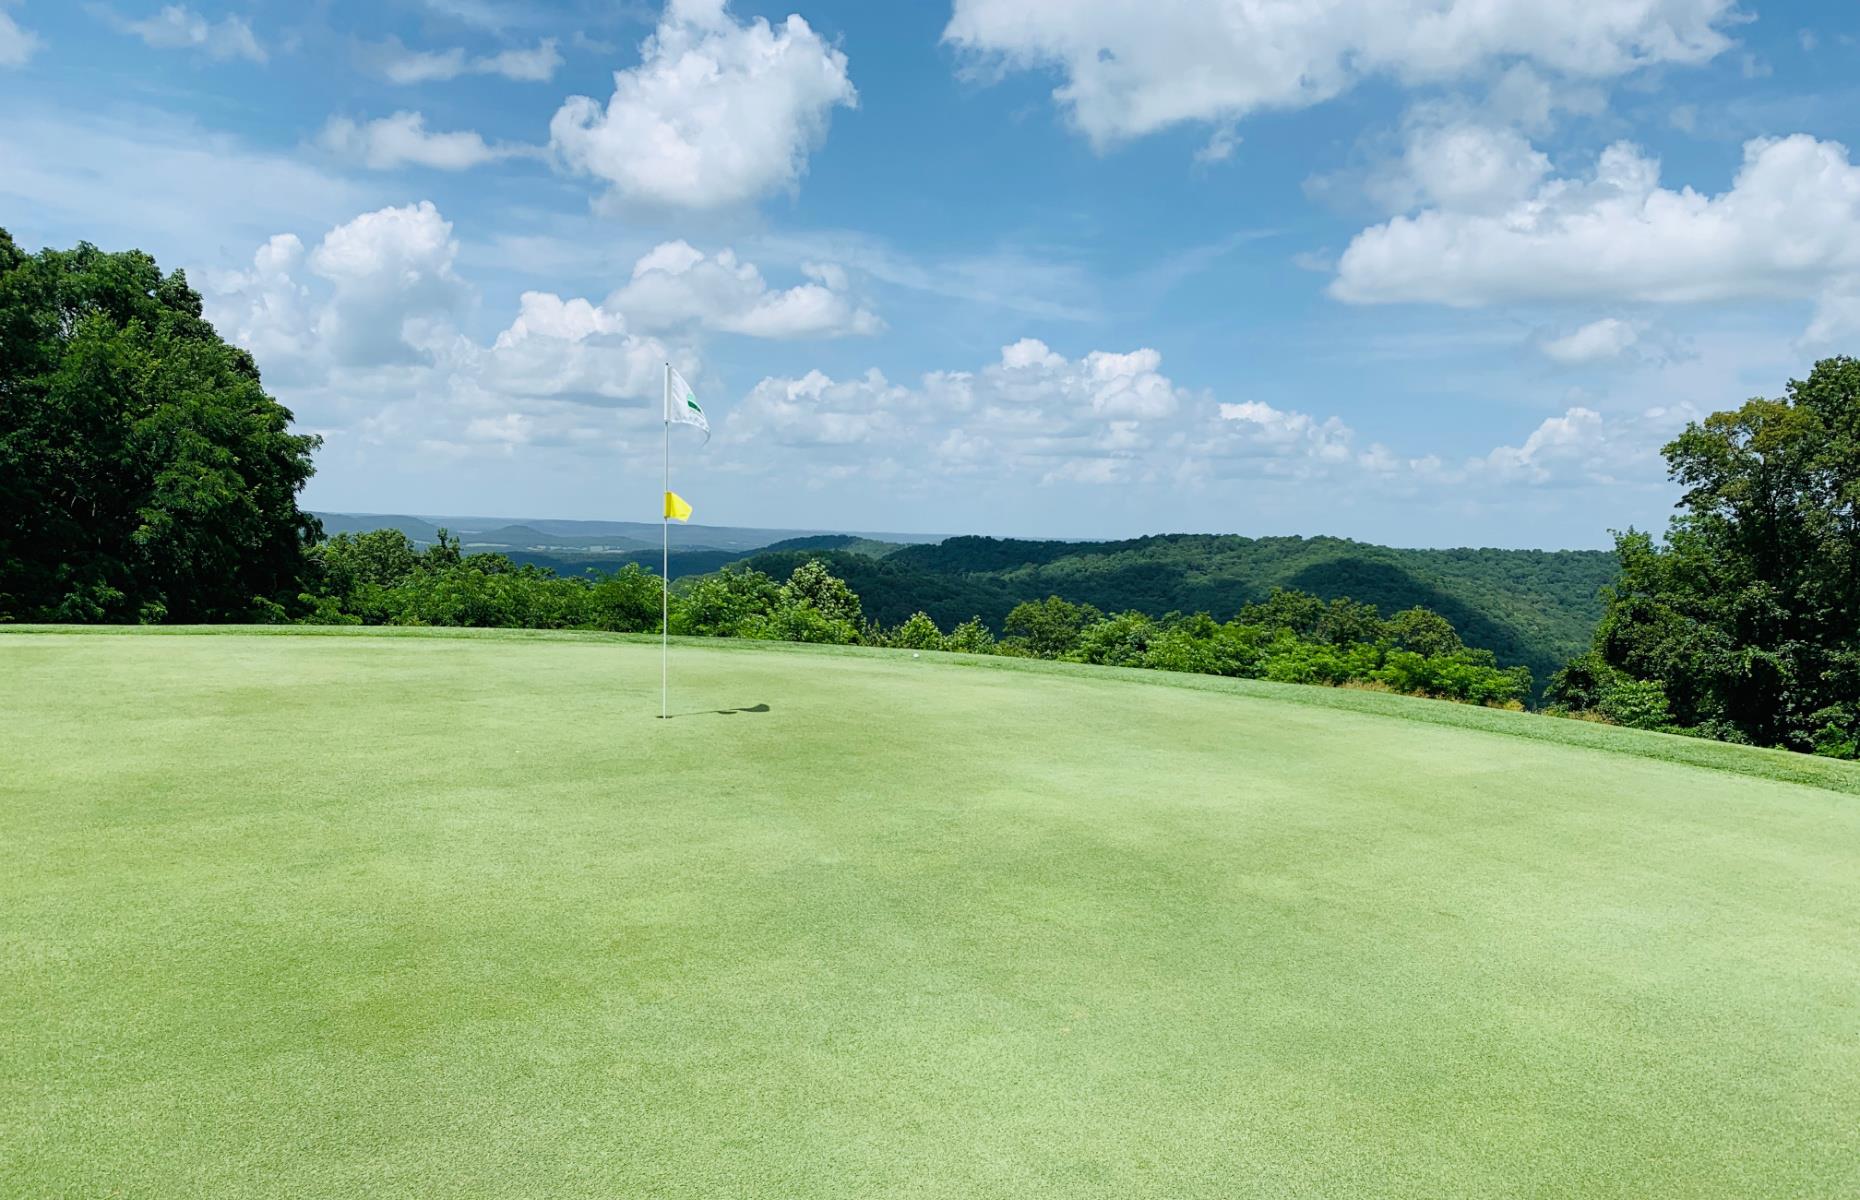 <p>Fishing, boating and hiking are all commonplace sports in the Ozarks, but golf is also extremely popular with visitors to the area, thanks to the beautiful views surrounding each course. There’s even a Lake of the Ozarks <a href="https://golfingmissouri.com/">“golf trail”</a> featuring 13 different golf courses. One of the Ozarks' most famous course is the Payne’s Valley Golf Course, the first public-access course designed by the one and only Tiger Woods.</p>